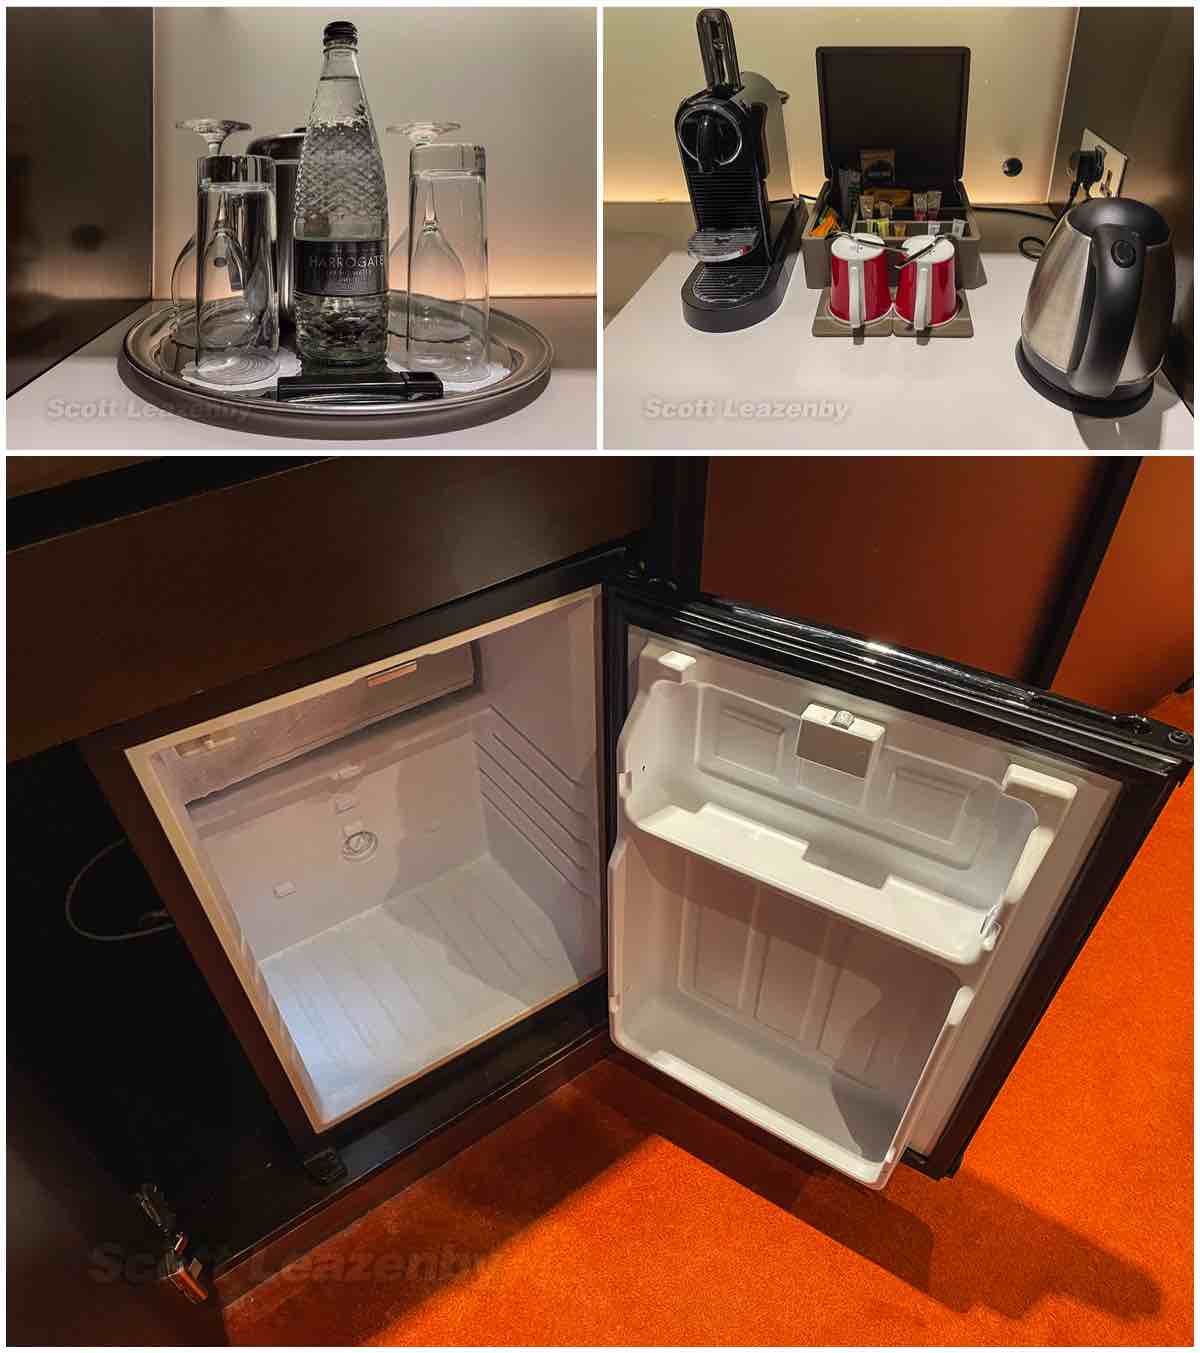 Park plaza Westminster Hotel London refrigerator and complementary drinks